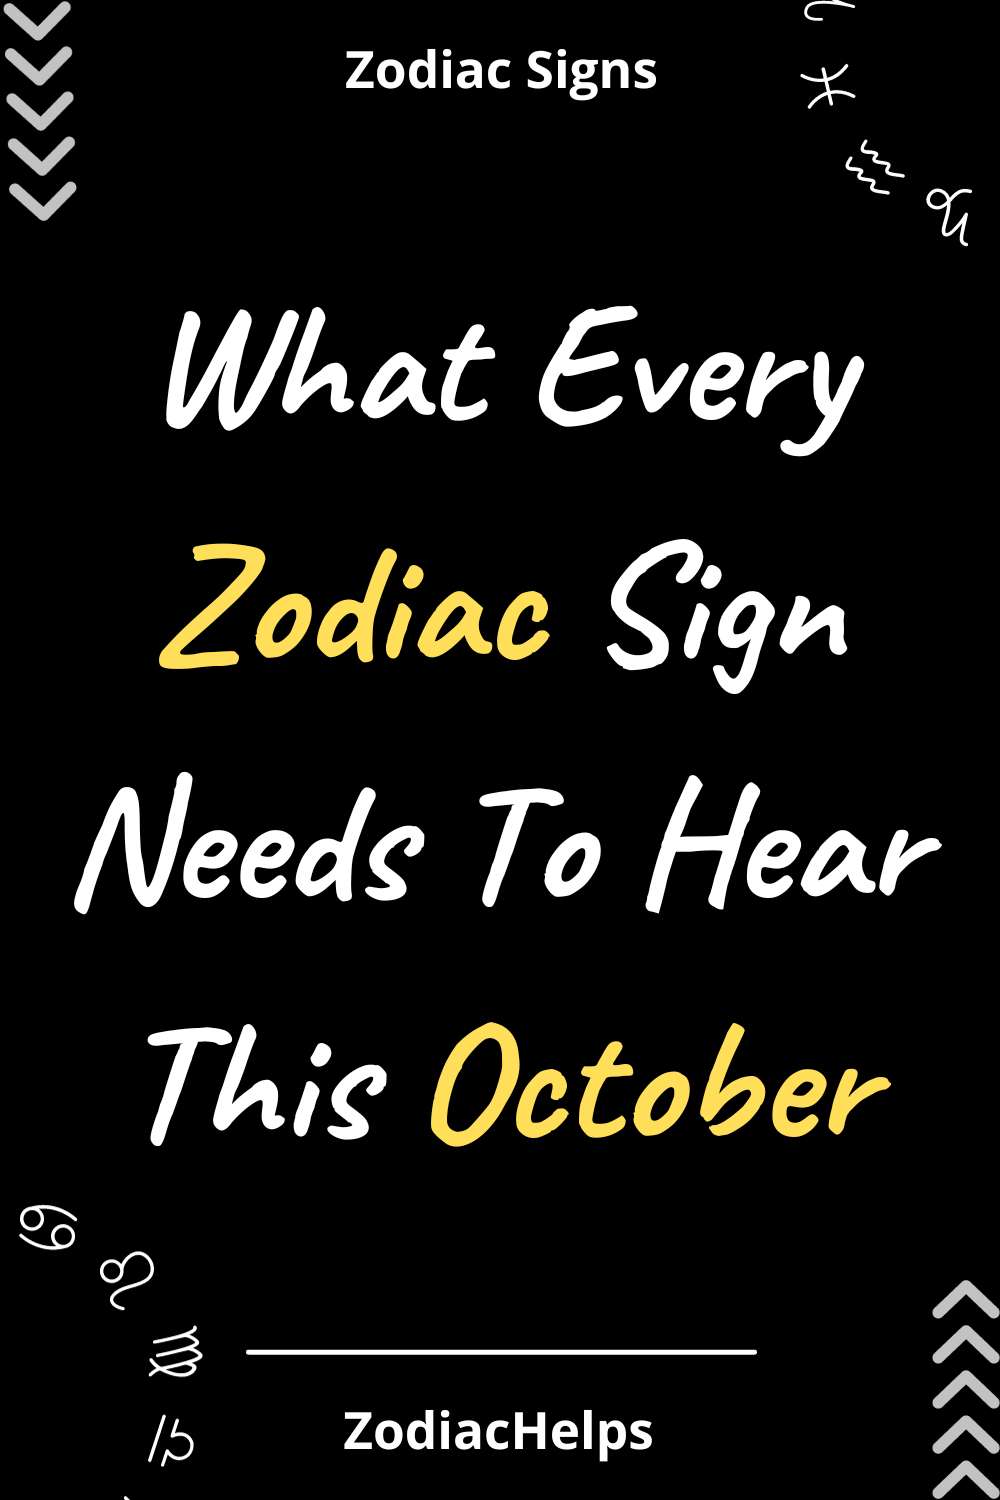 What Every Zodiac Sign Needs To Hear This October